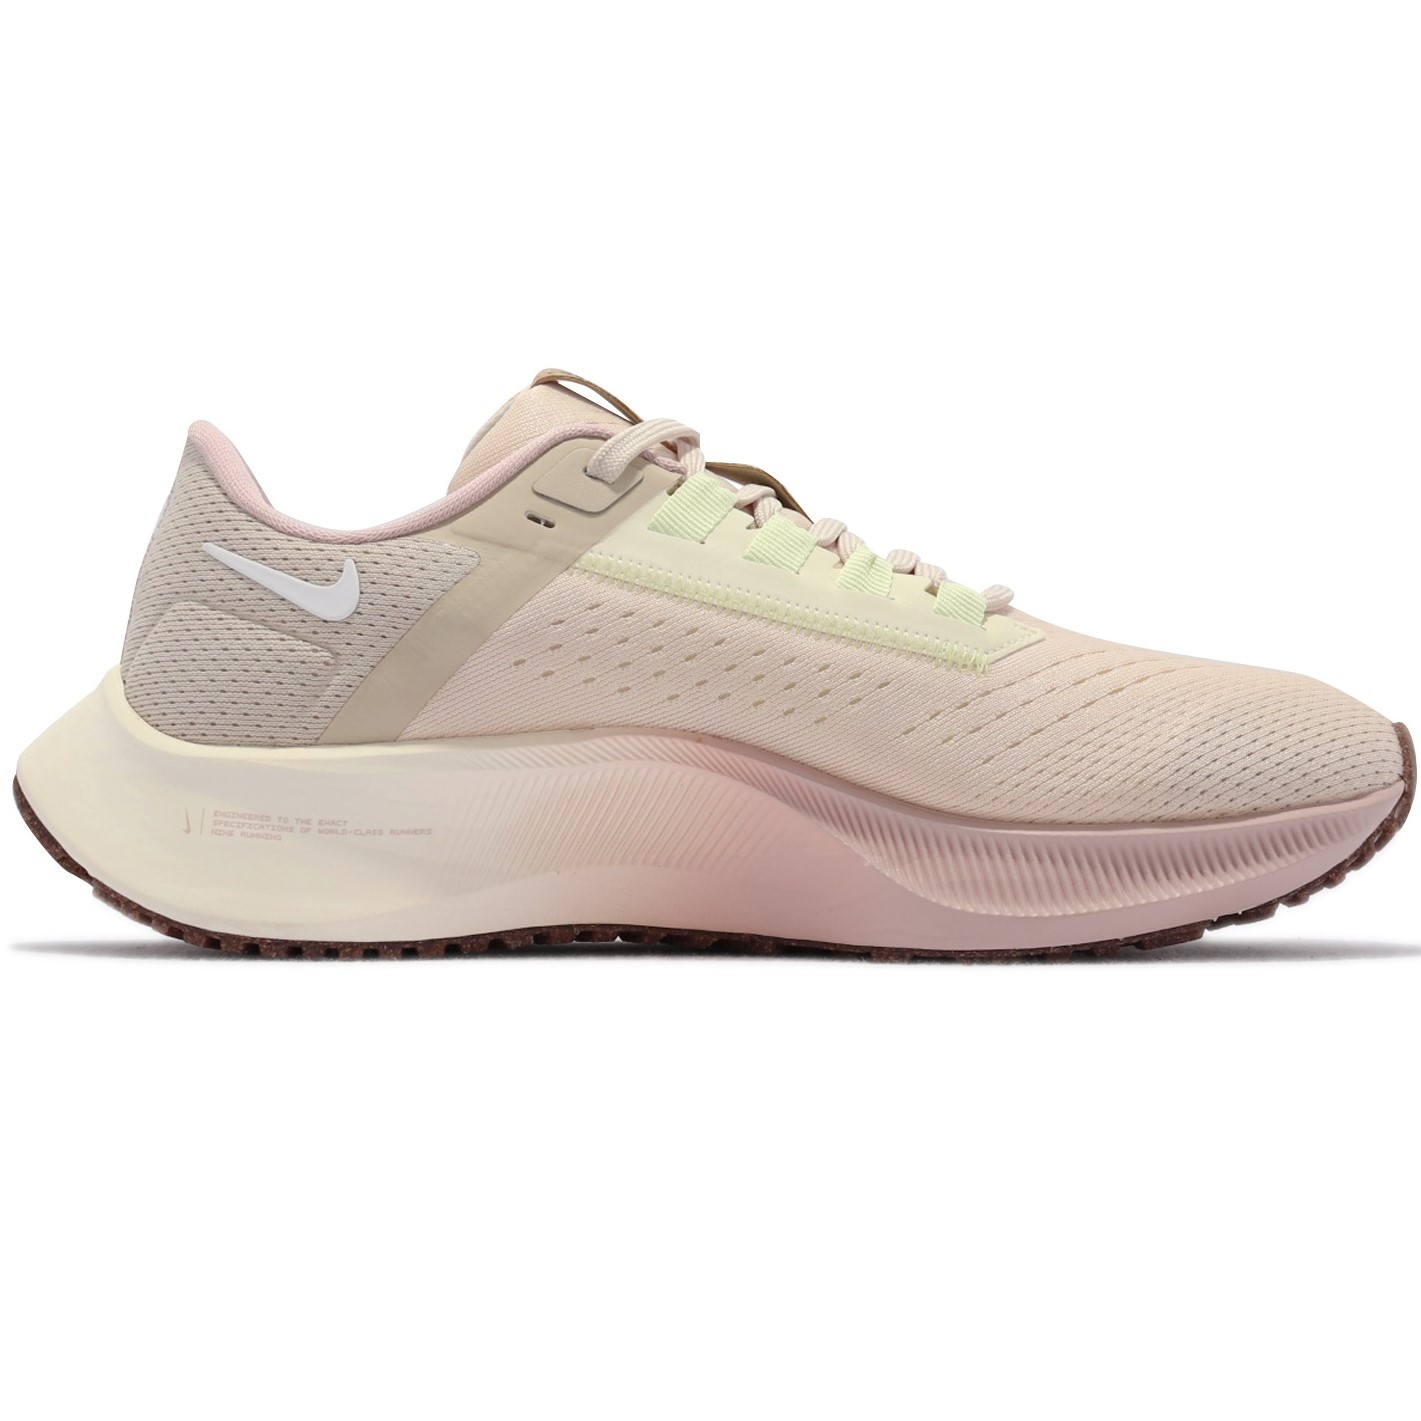 GIÀY THỂ THAO NIKE WMNS AIR ZOOM PEGASUS 38 WOMEN RUNNING SHOES BEIGE 5